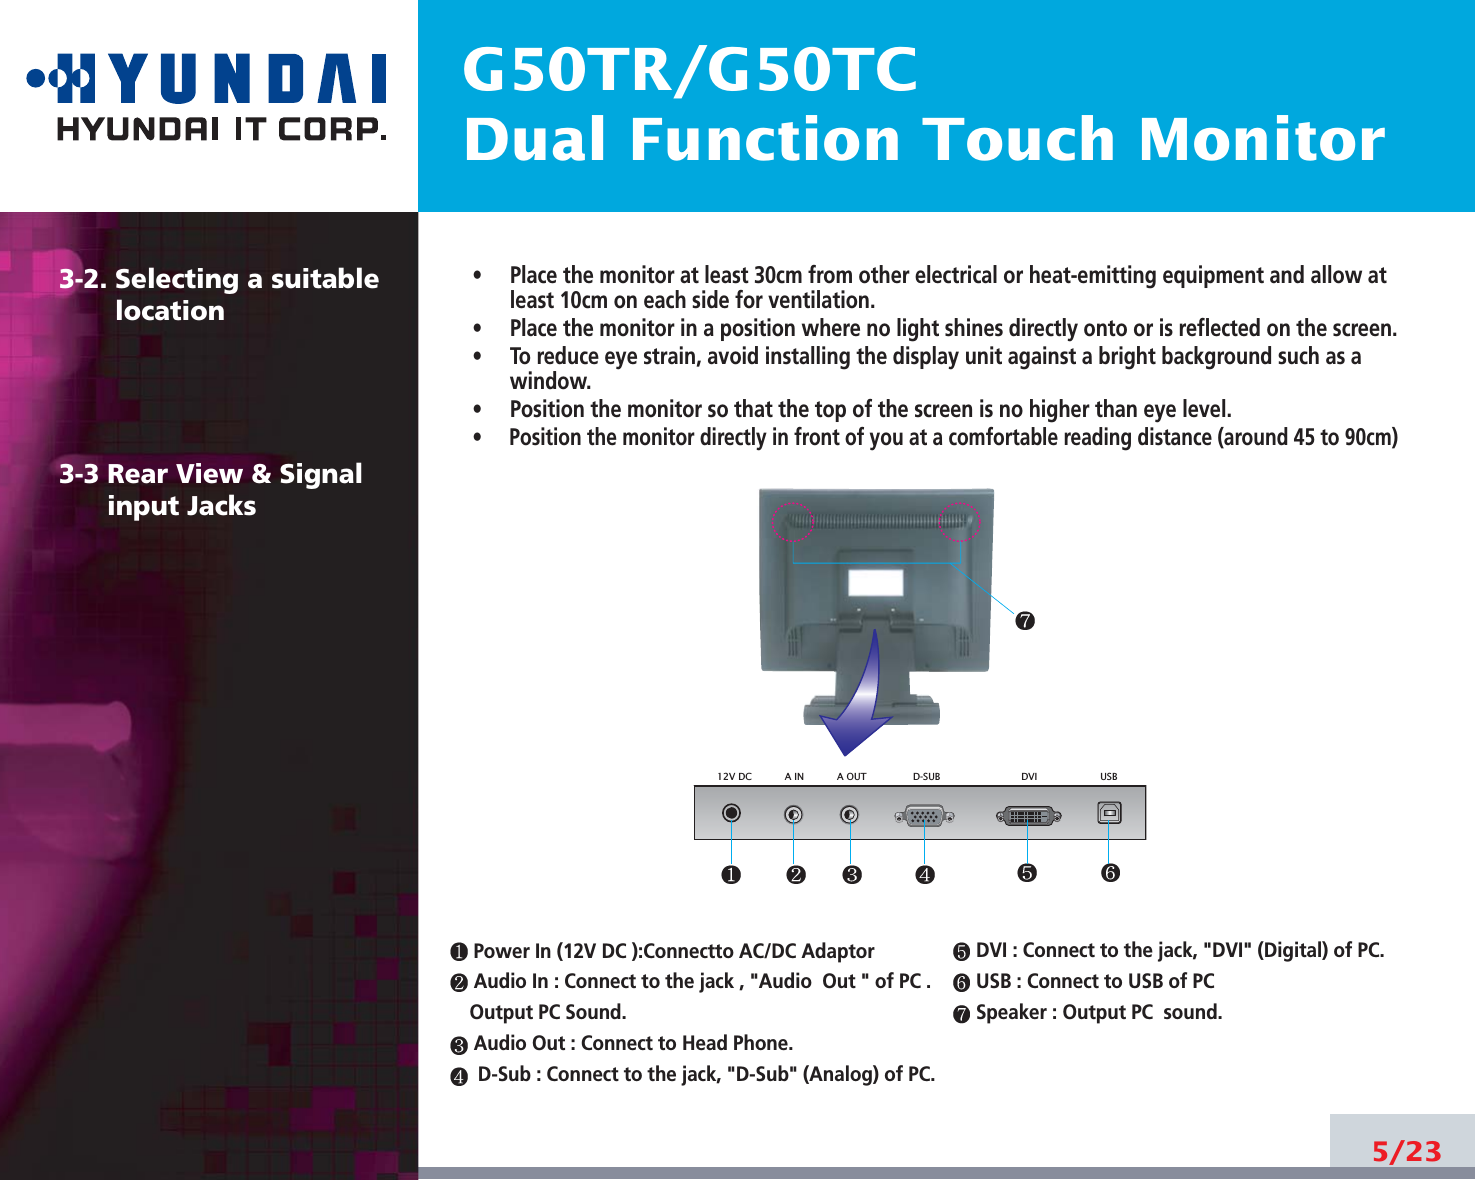 G50TR/G50TCDual Function Touch Monitor5/233-2. Selecting a suitablelocation3-3 Rear View &amp; Signalinput Jacks•     Place the monitor at least 30cm from other electrical or heat-emitting equipment and allow atleast 10cm on each side for ventilation.•     Place the monitor in a position where no light shines directly onto or is reflected on the screen.•     To reduce eye strain, avoid installing the display unit against a bright background such as awindow.•     Position the monitor so that the top of the screen is no higher than eye level.•   Position the monitor directly in front of you at a comfortable reading distance (around 45 to 90cm) Power In (12V DC ):Connectto AC/DC Adaptor    Audio In : Connect to the jack , &quot;Audio  Out &quot; of PC .Output PC Sound. Audio Out : Connect to Head Phone. D-Sub : Connect to the jack, &quot;D-Sub&quot; (Analog) of PC.                DVI : Connect to the jack, &quot;DVI&quot; (Digital) of PC.USB : Connect to USB of PC Speaker : Output PC  sound.   USB12V DC A IN DVIA OUT D-SUB